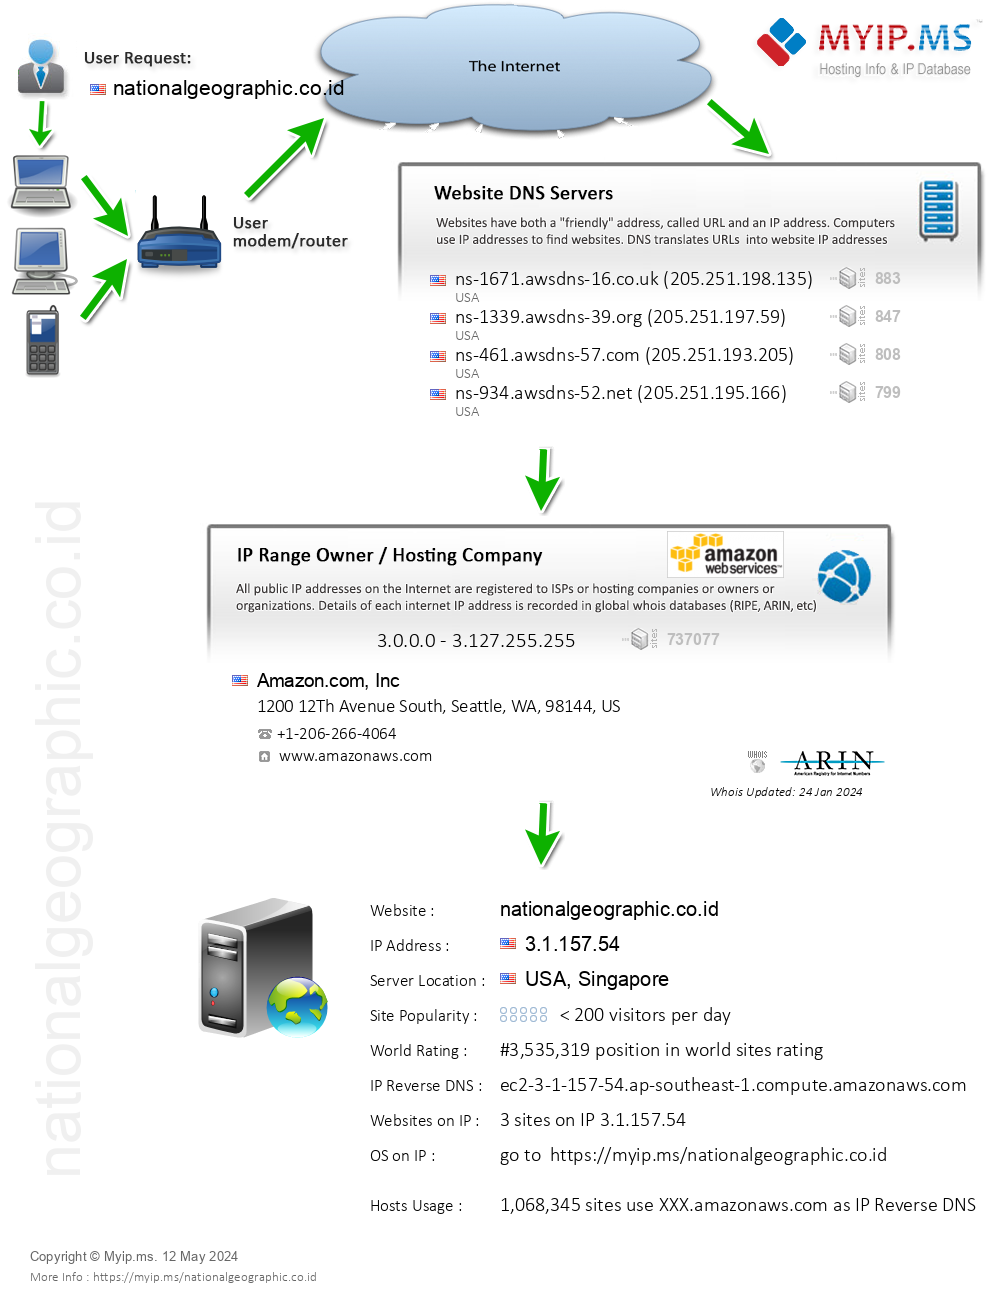 Nationalgeographic.co.id - Website Hosting Visual IP Diagram